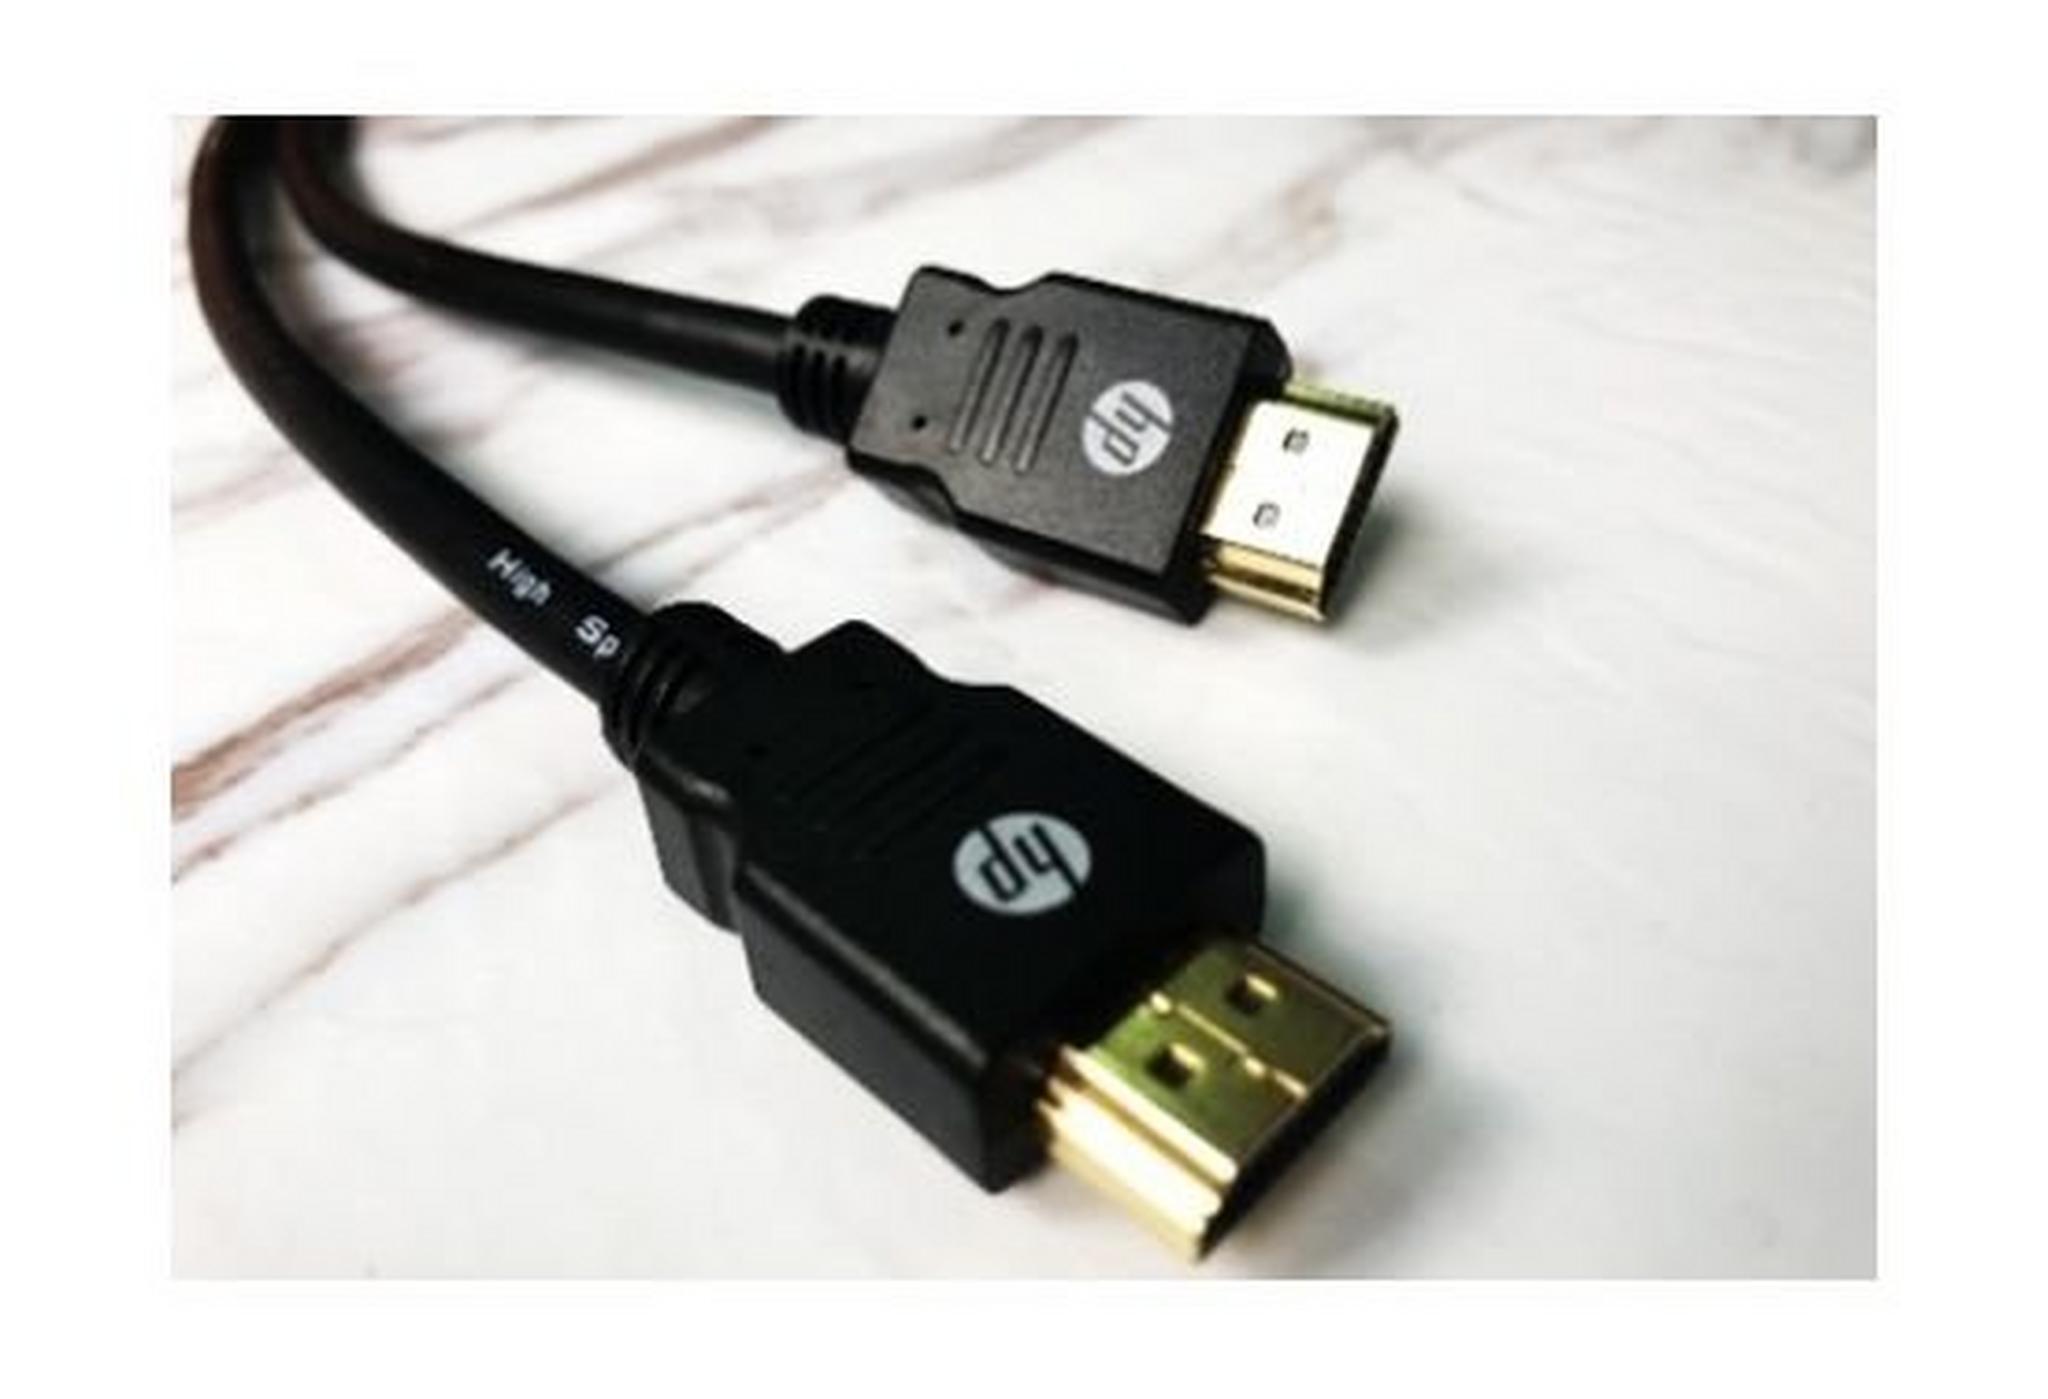 HP HDMI to HDMI 5 Meter Cable - Black